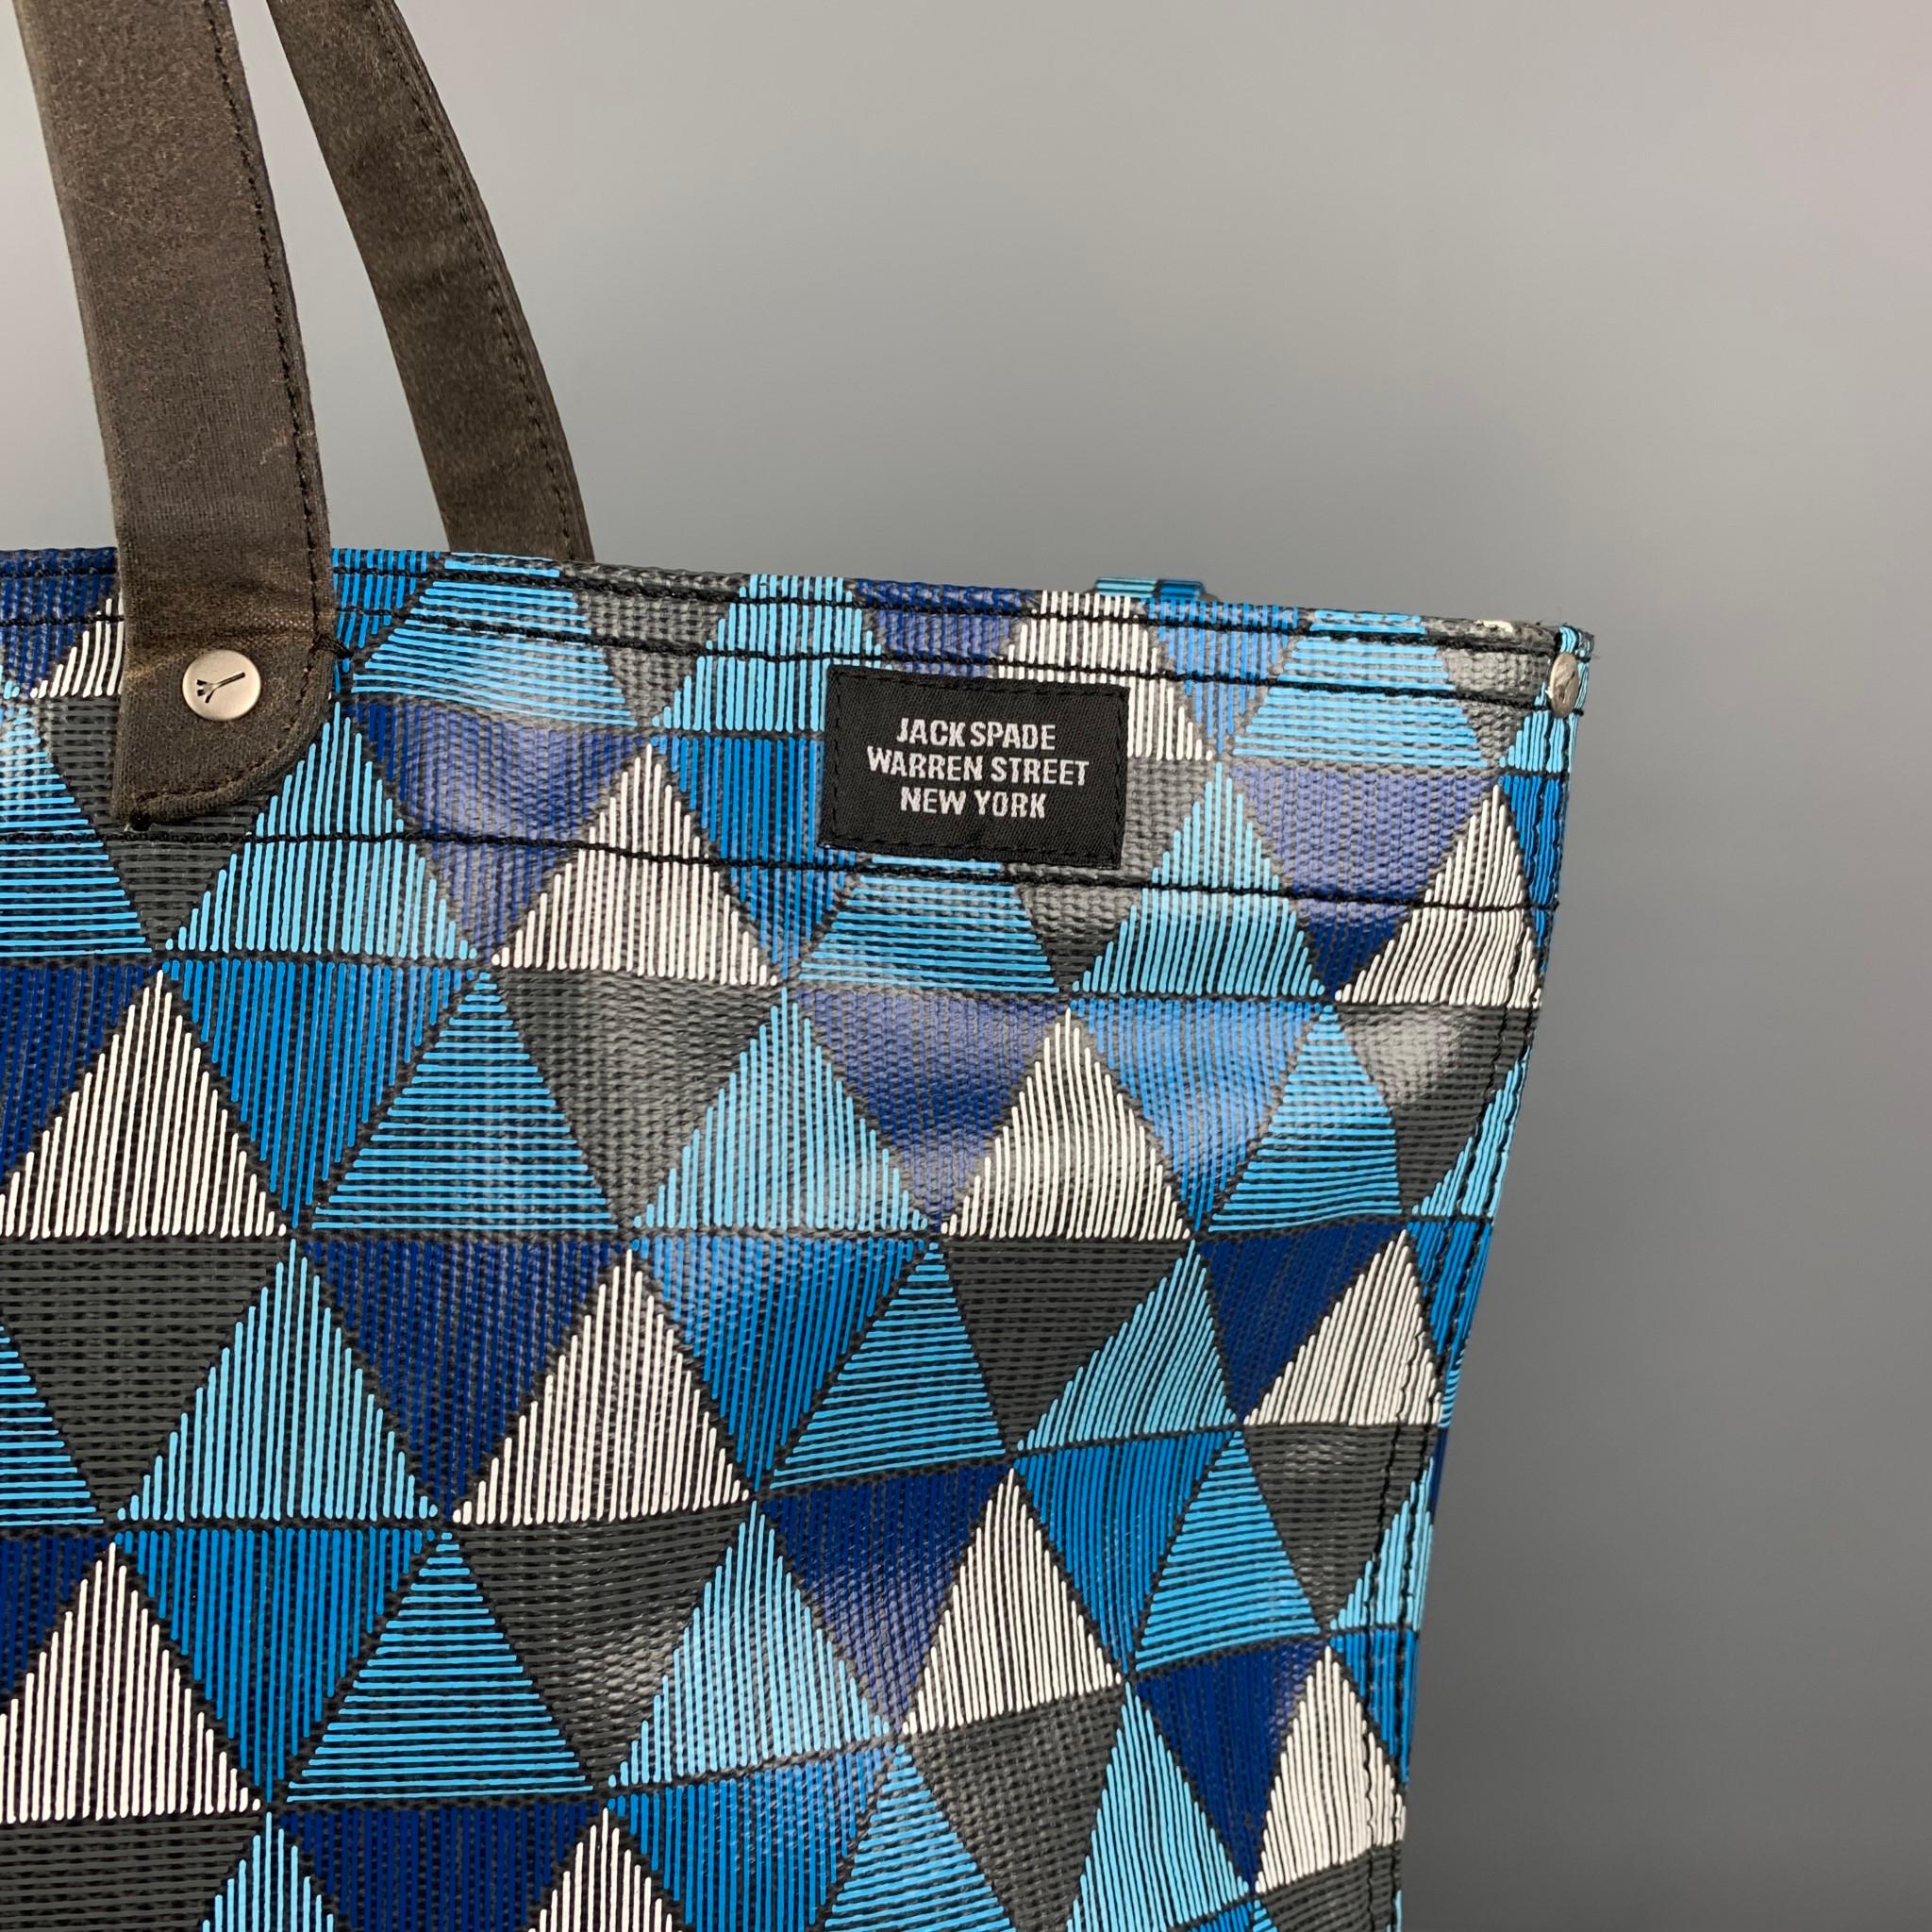 JACK SPADE bag comes in a blue & charcoal triangle print acetate featuring a tote style, detachable strap, inner pockets, and top handles. 

Good Pre-Owned Condition. Minor discoloration.

Measurements:

Length: 15.5 in.
Width: 6.25 in.
Height: 13.5